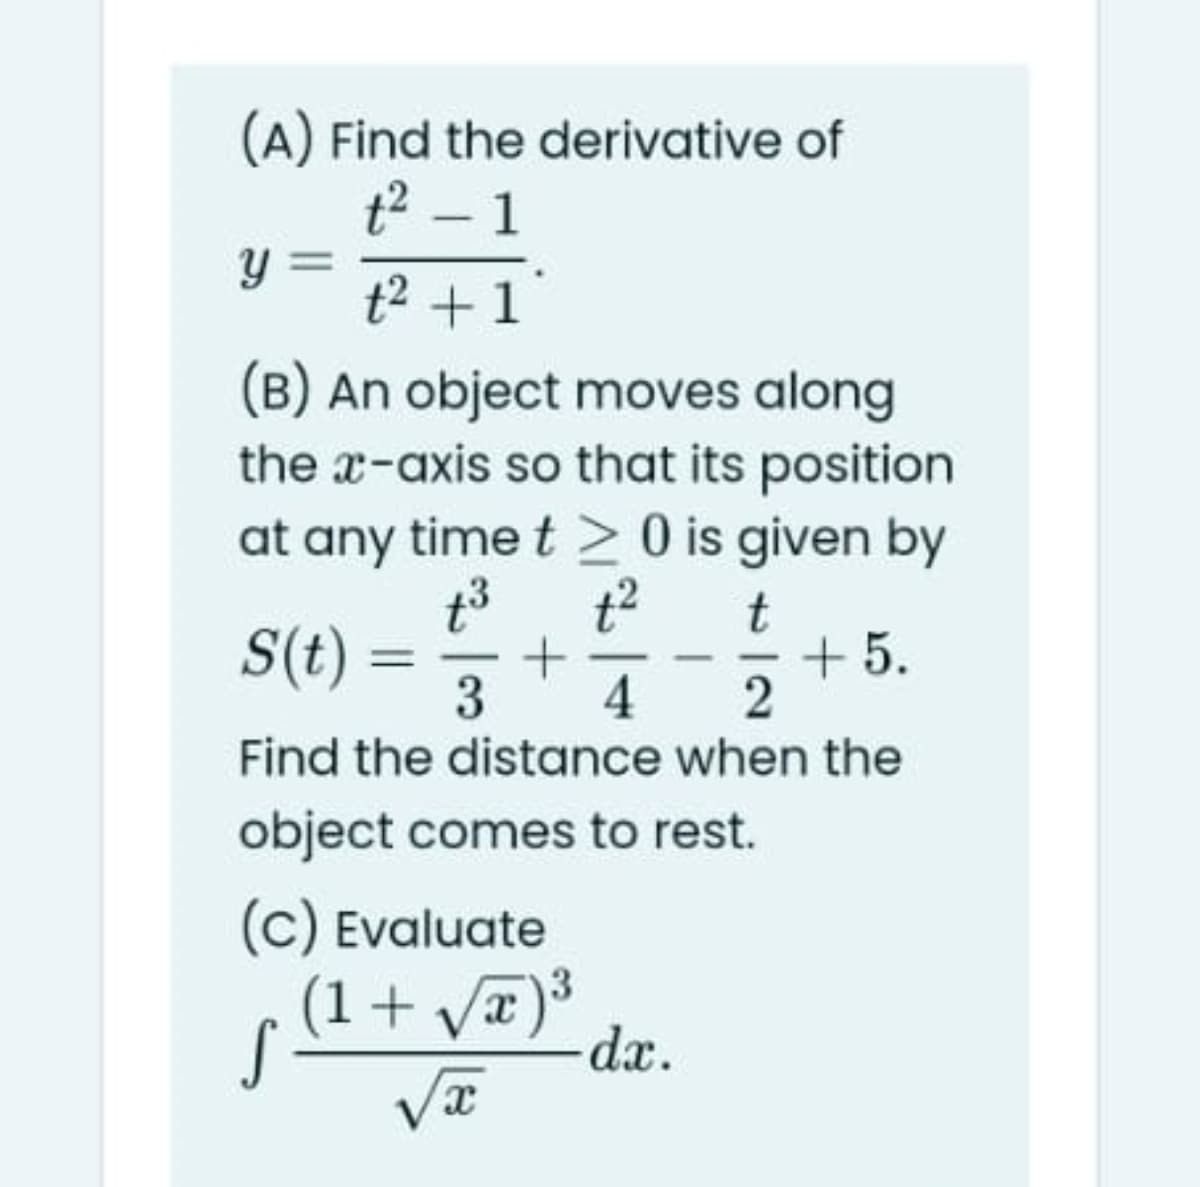 (A) Find the derivative of
t2 – 1
y =
t2 +1
(B) An object moves along
the x-axis so that its position
at any time t > 0 is given by
t3
t2
S(t) =
t
+ 5.
-
3
4
Find the distance when the
object comes to rest.
(C) Evaluate
(1+ va)3
dx.
